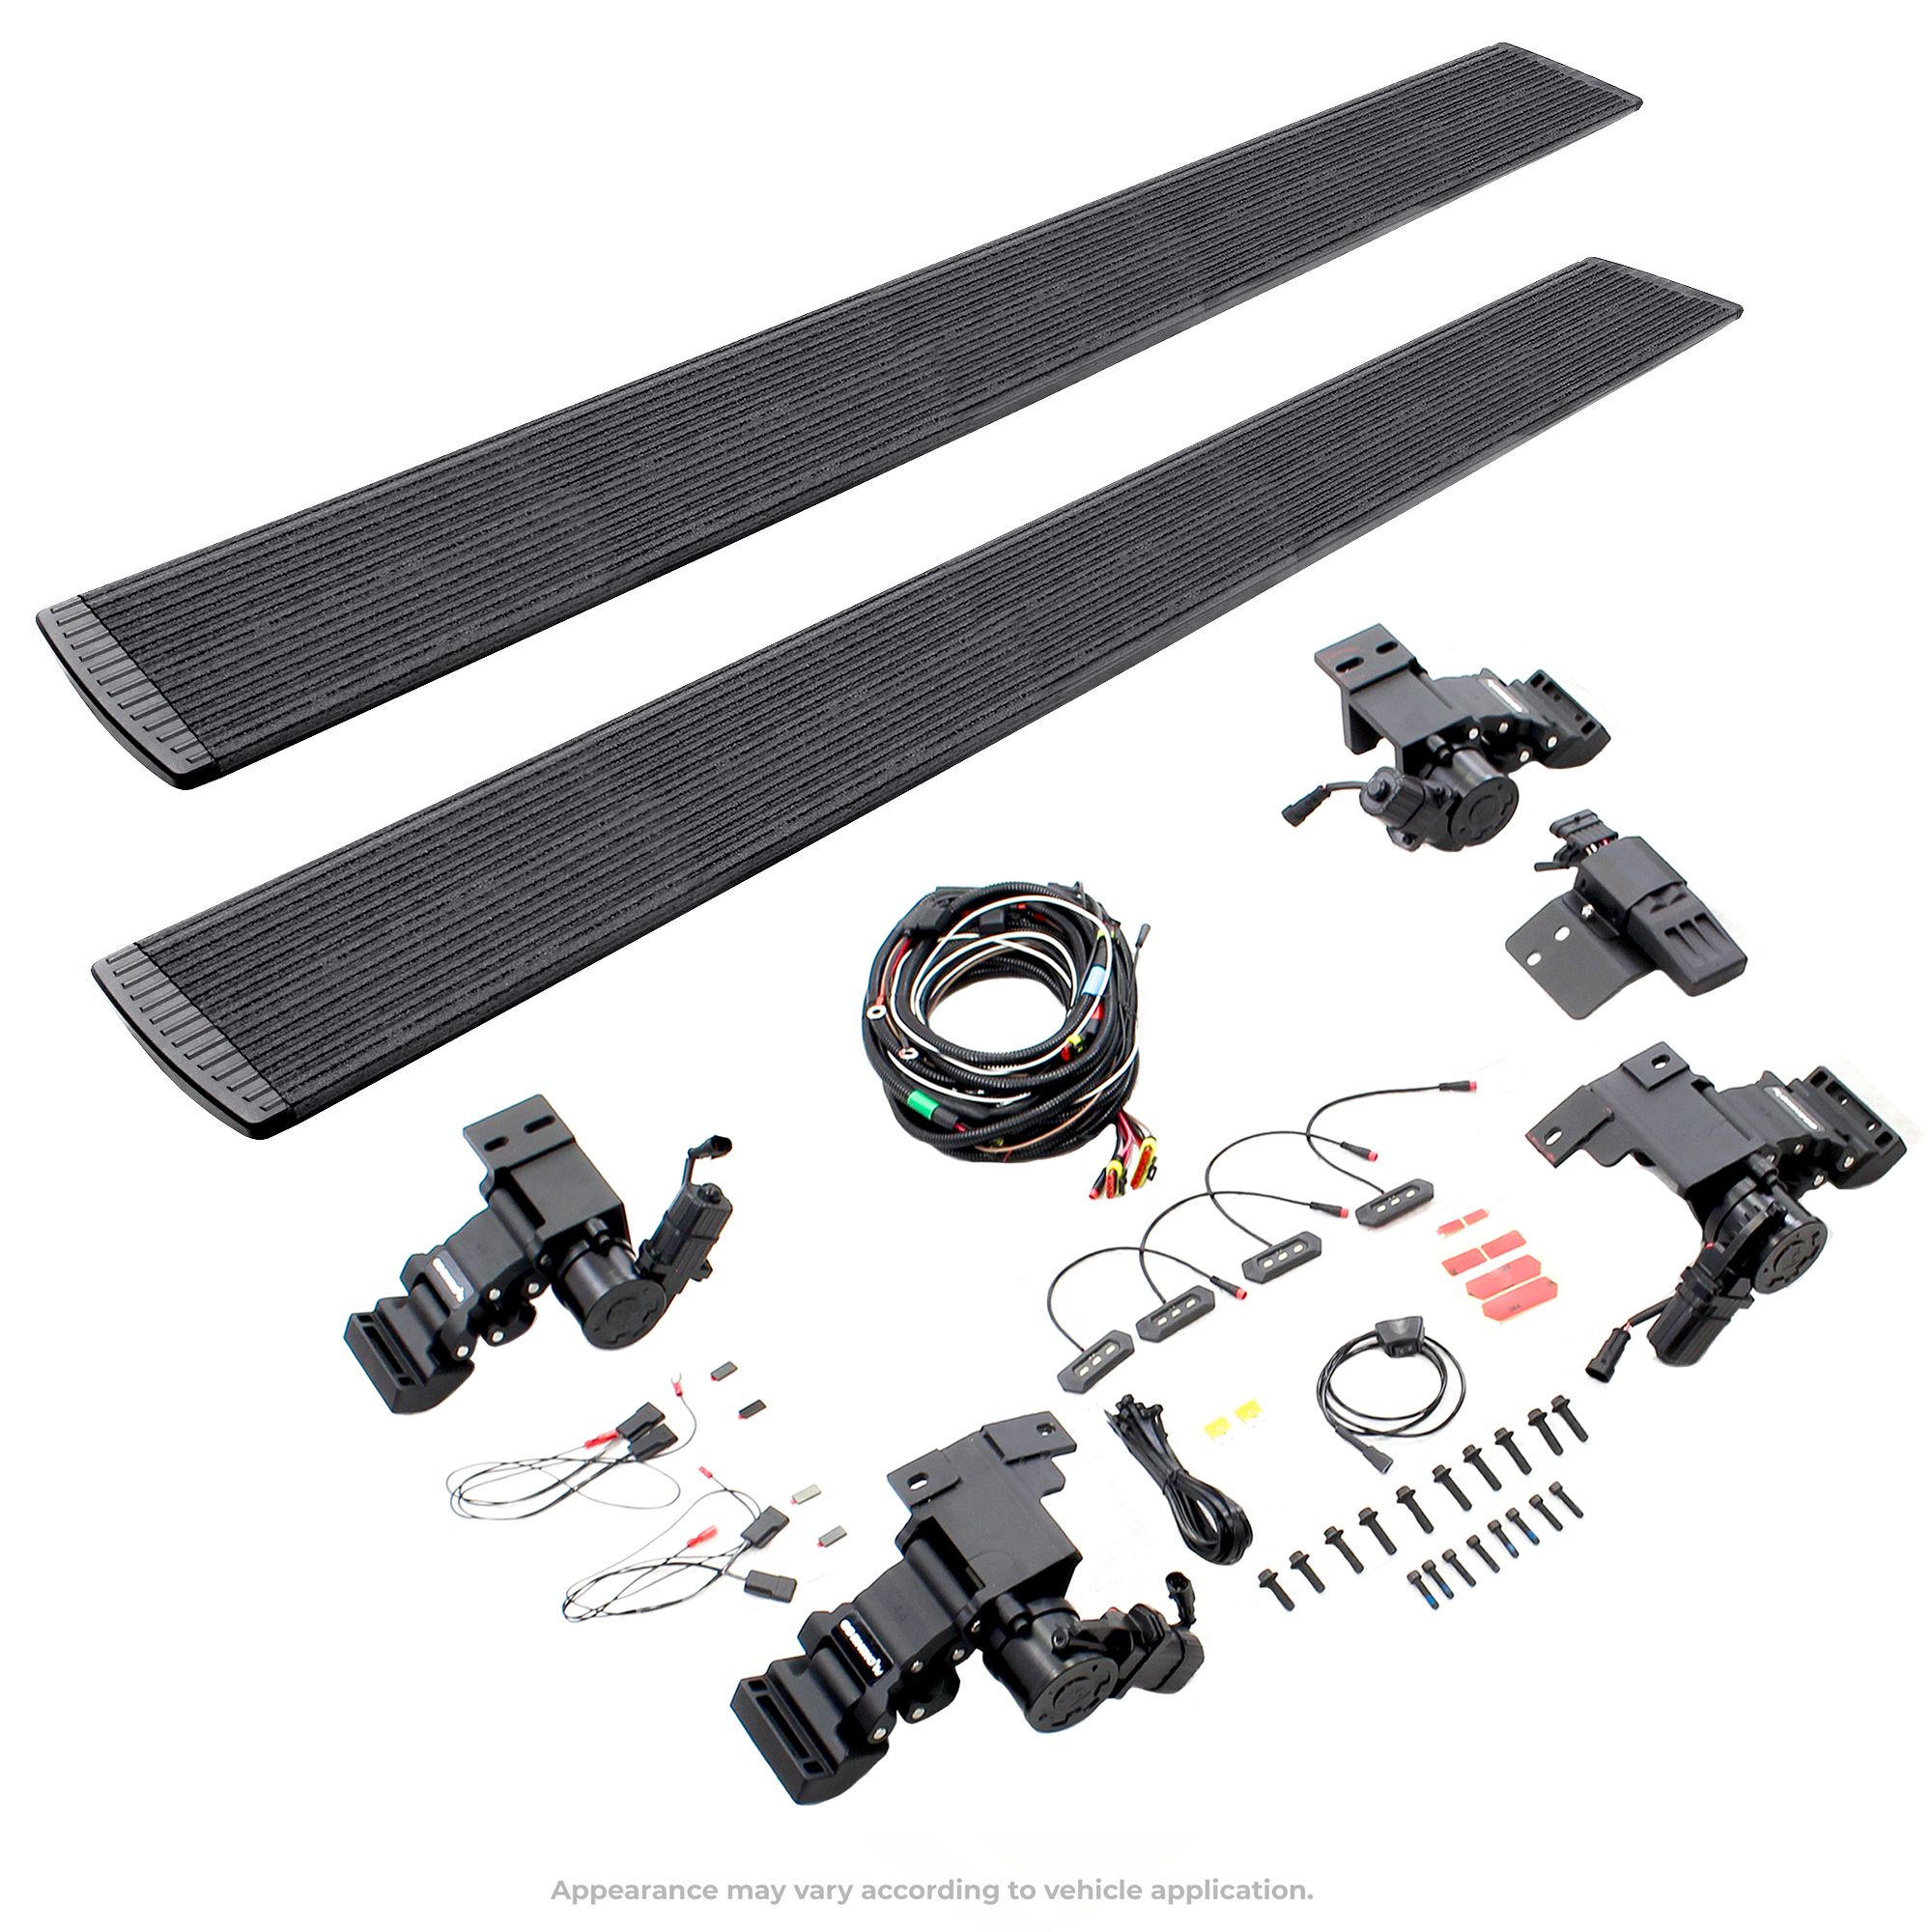 Go Rhino 20404587T - E1 Electric Running Boards With Mounting Brackets - Protective Bedliner Coating